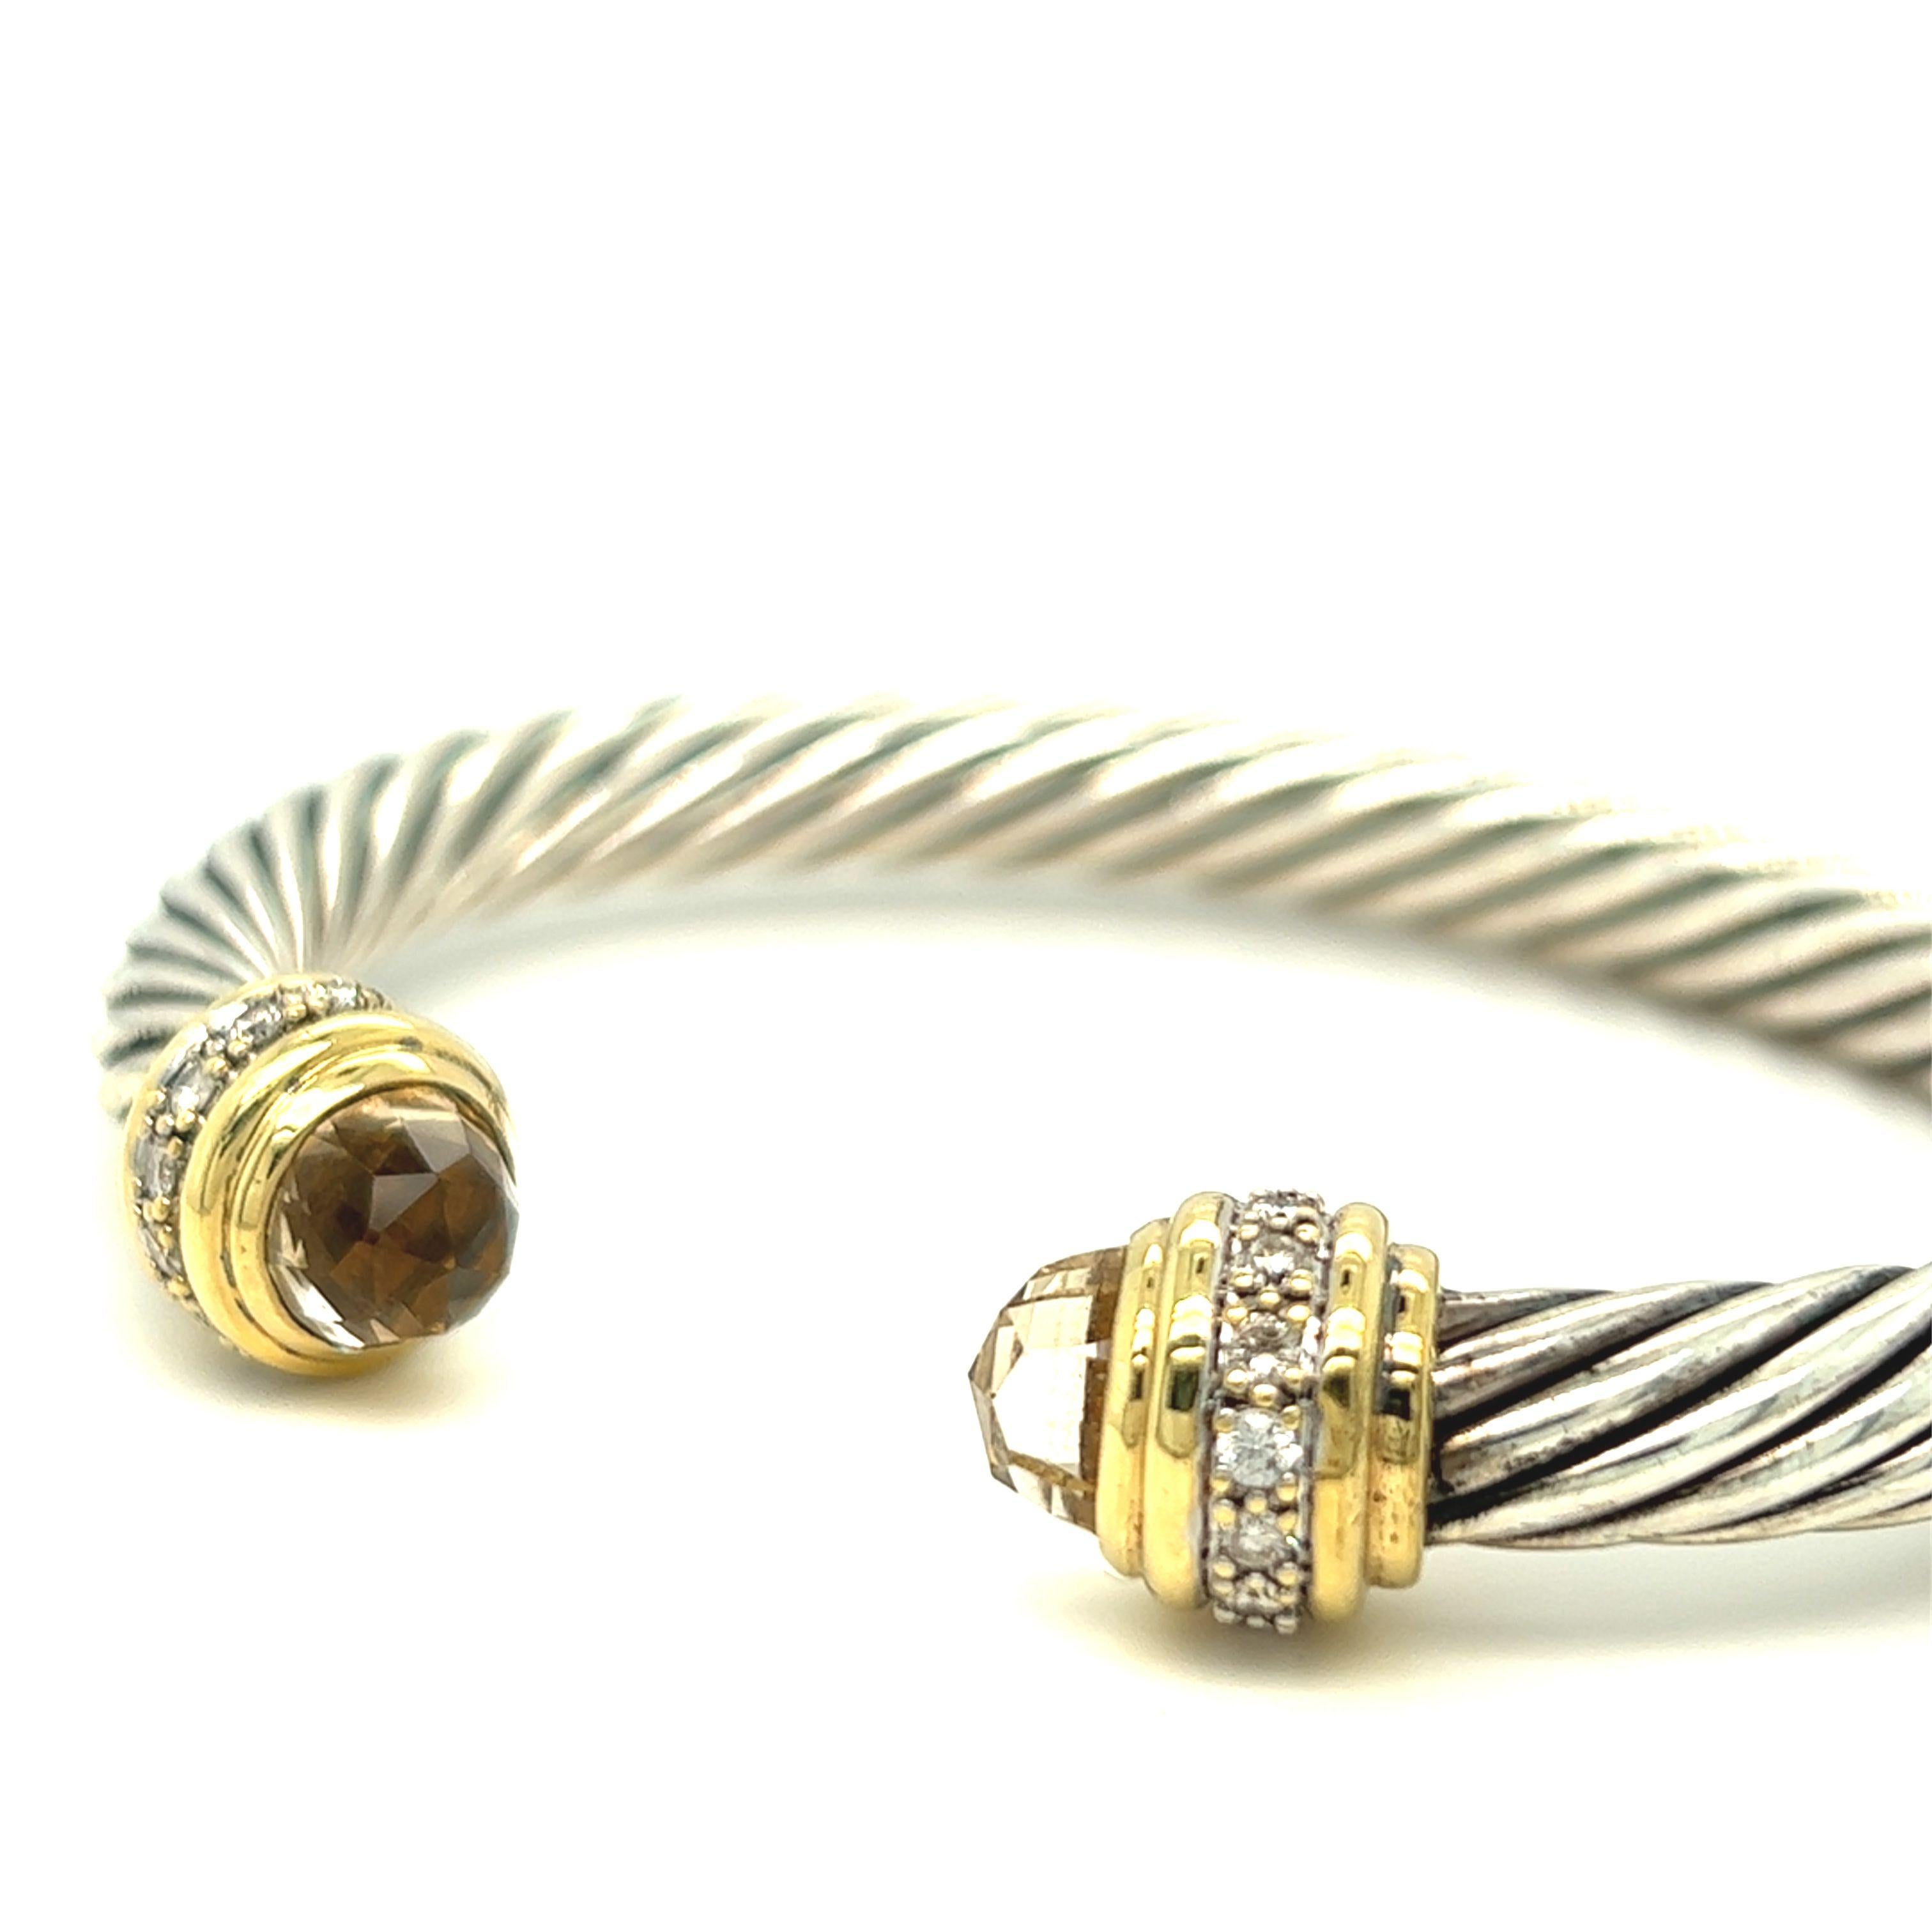 From The Cable Collection for Women by David Yurman, this cable cuff bracelet in sterling silver and 18k yellow gold is decorated with citrine and pavé diamonds. 
Stamp D.Y 925 750

Designer: David Yurman
Material: sterling silver & 18K yellow